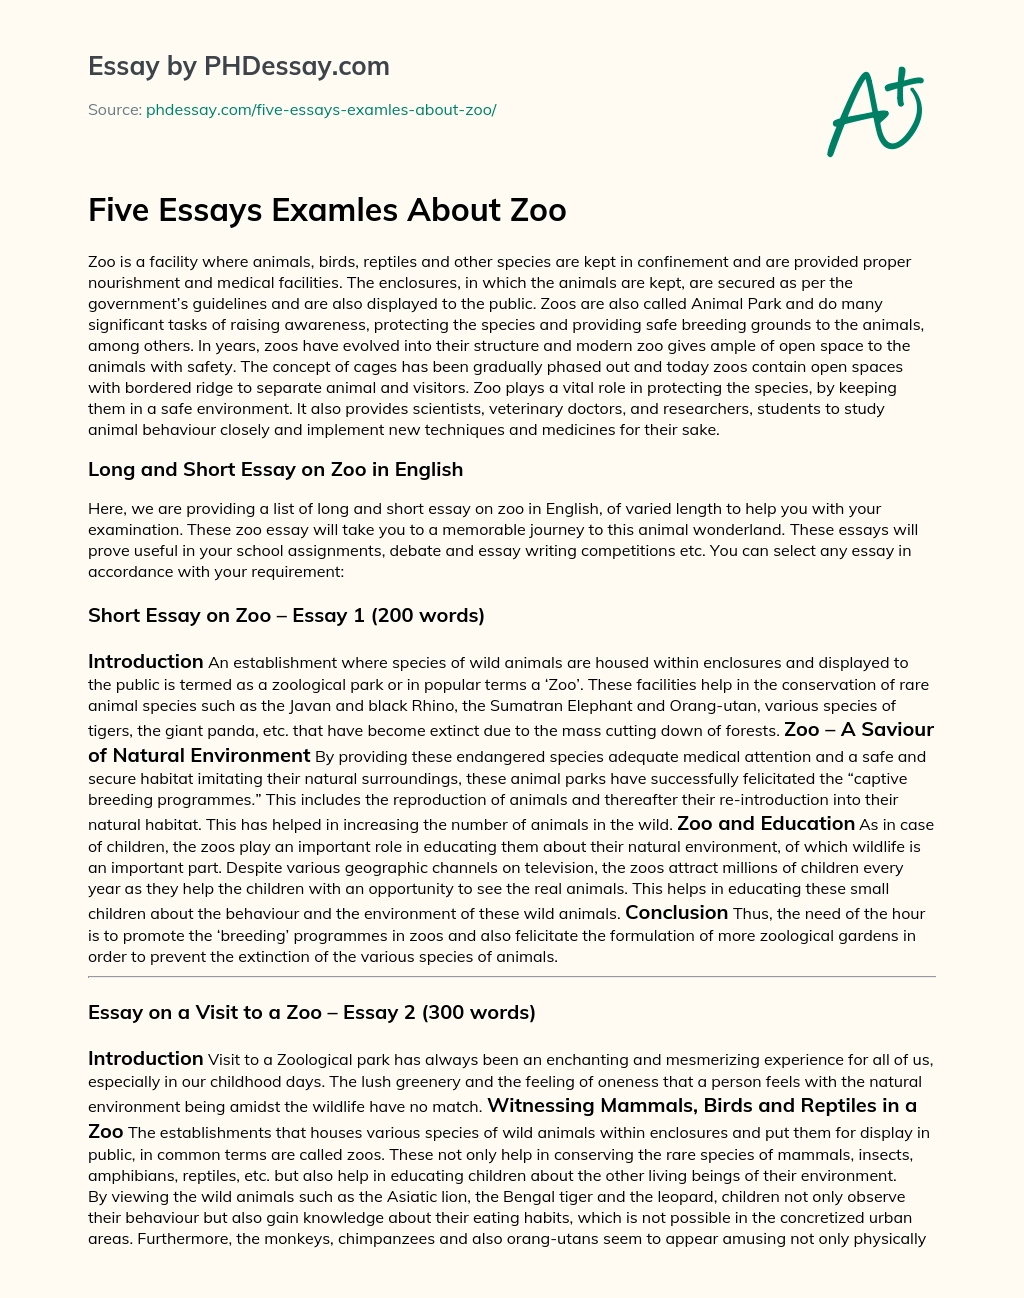 Five Essays Examles About Zoo essay